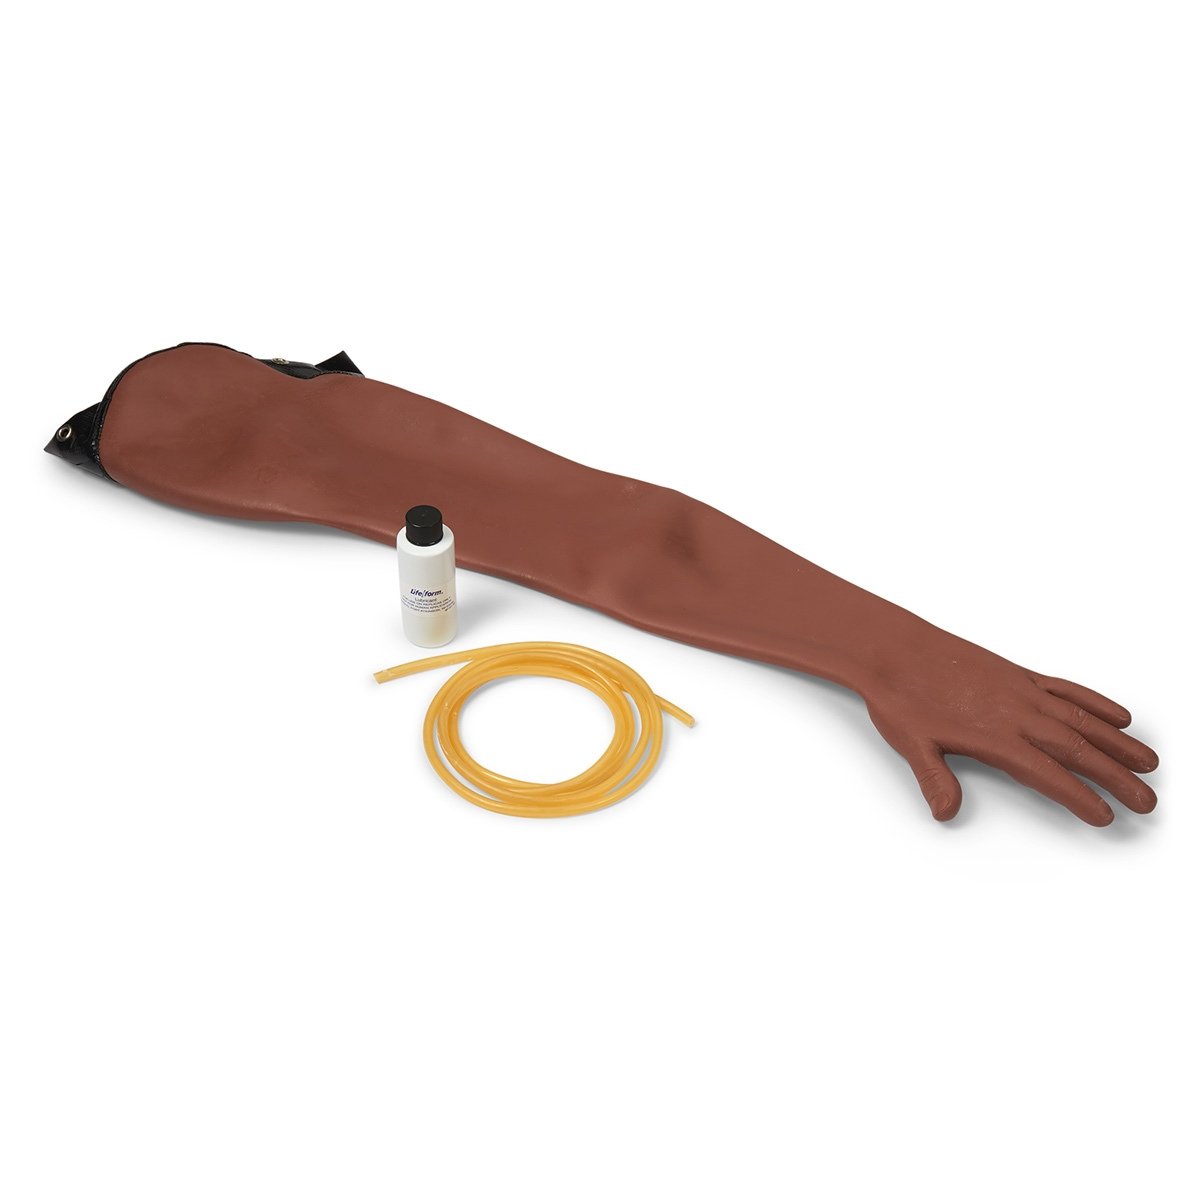 Life/form Venipuncture and Injection Training Arm: Skin and Vein Replacement Kit - Medium